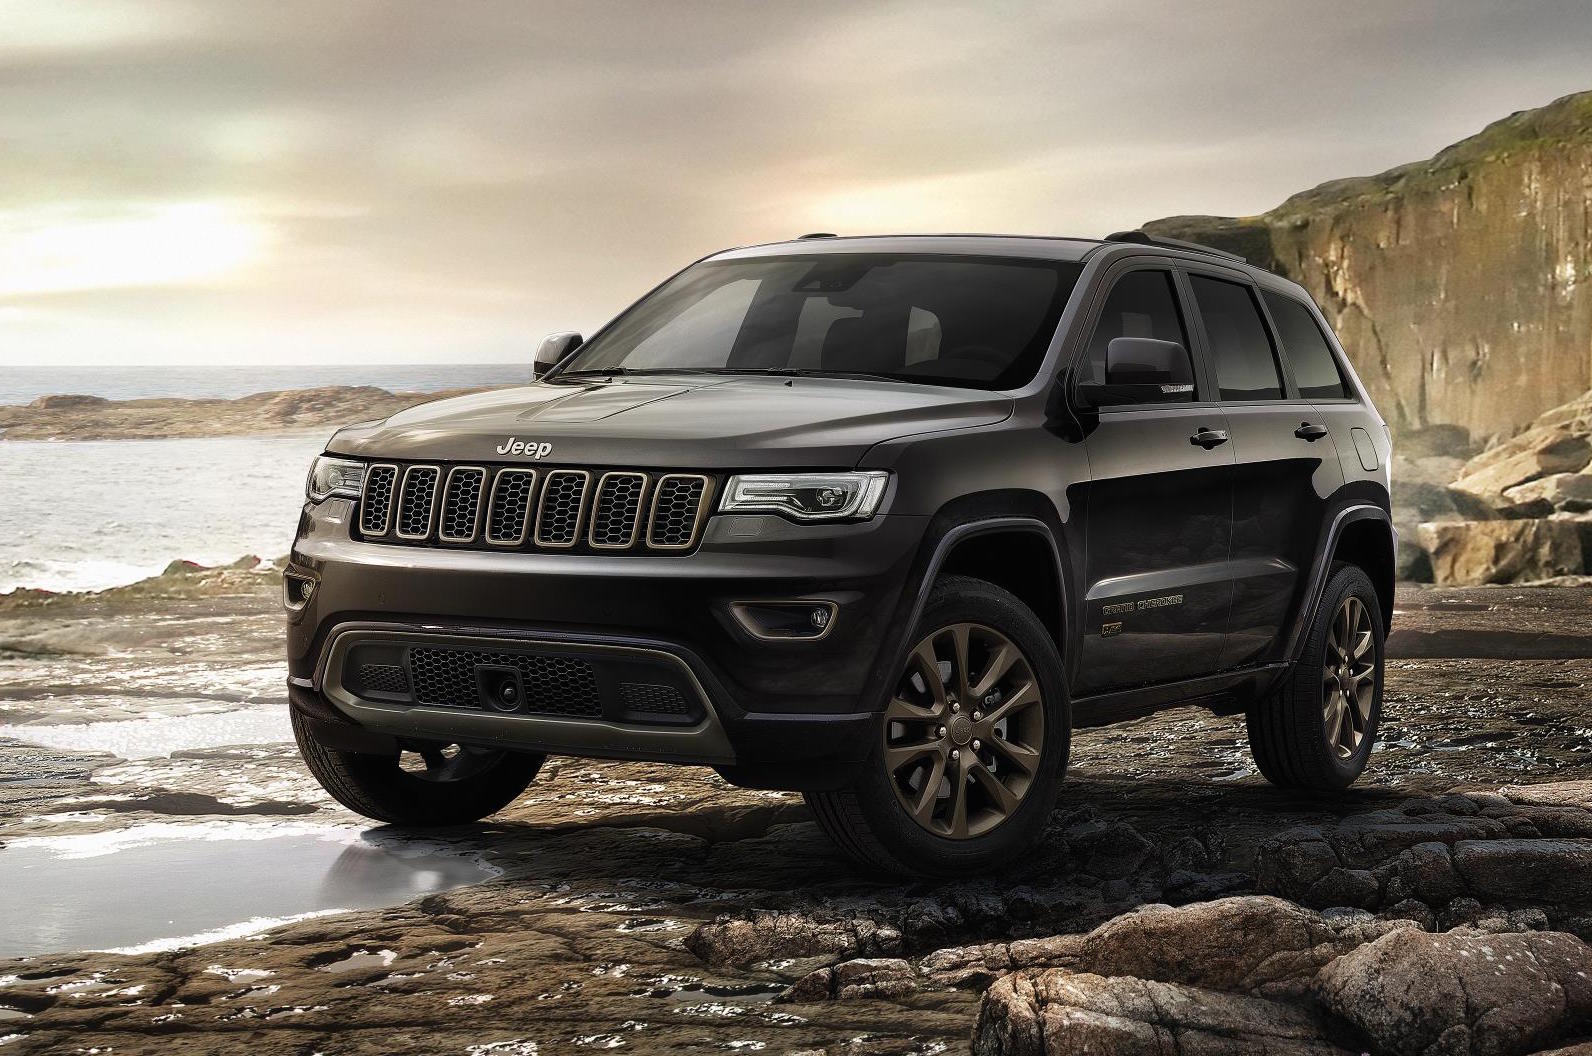 2017 Jeep Grand Cherokee gets new shifter, electric